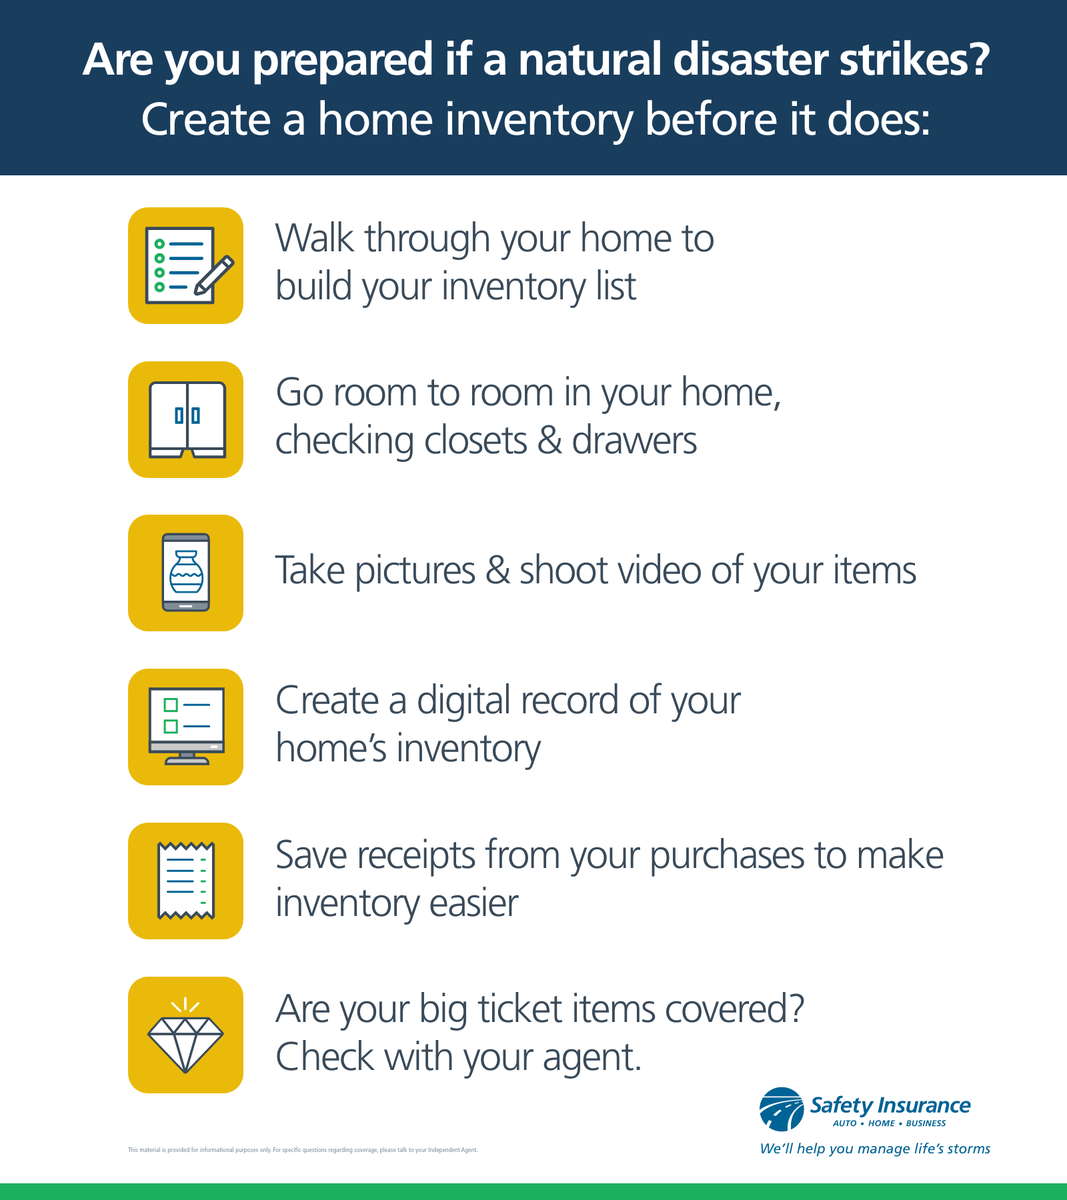 To participate in #HurricanePreparednessWeek, consider creating a home inventory list to help protect yourself if a natural disaster strikes. #HurricanePrep #PrepareNow #ManageLifesStorms